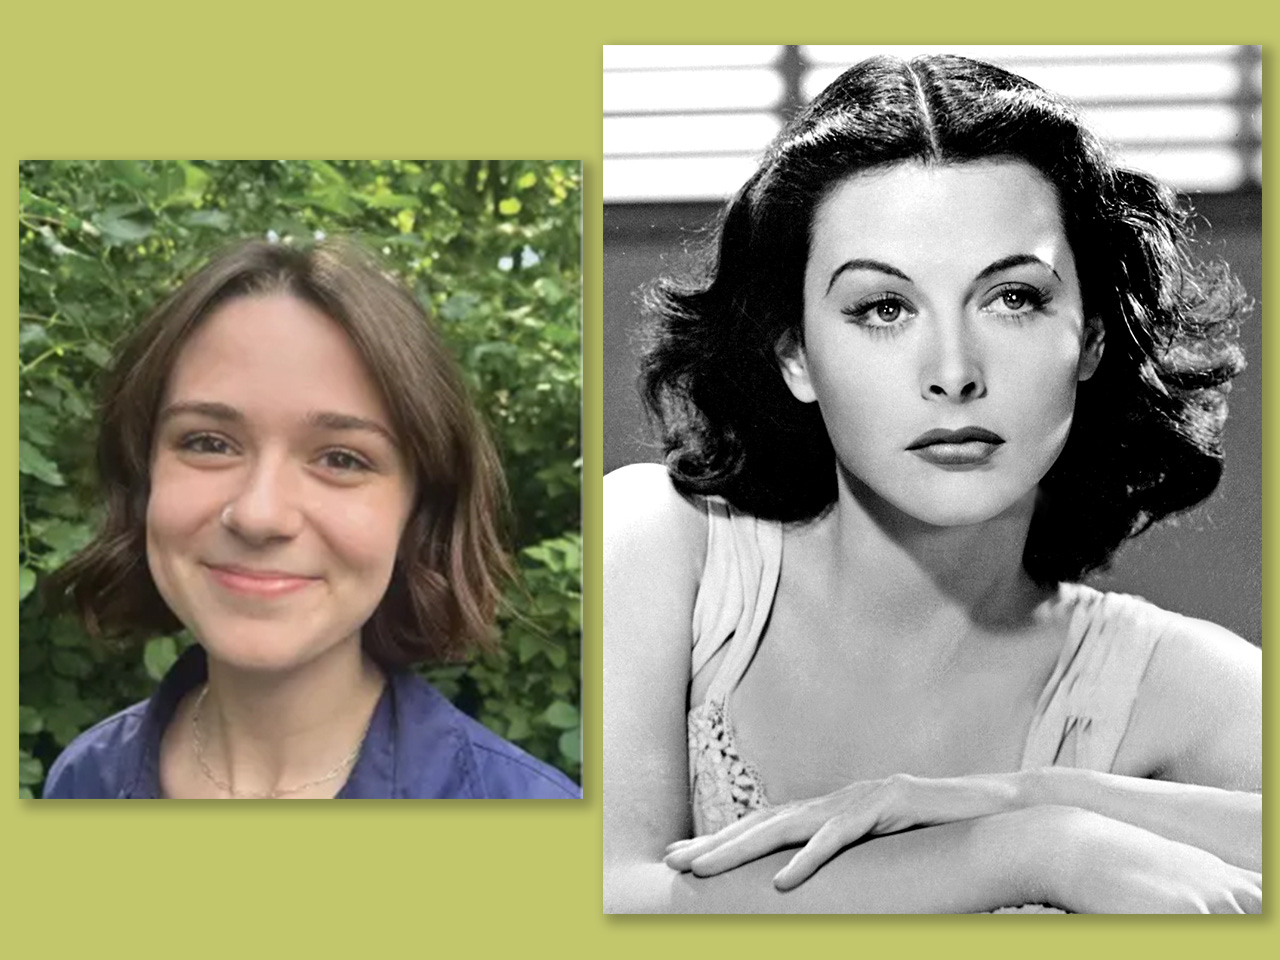 Composite of two headshots with lime green background; SMTD student Emelia Piane and Hedy Lamarr in the 1940s